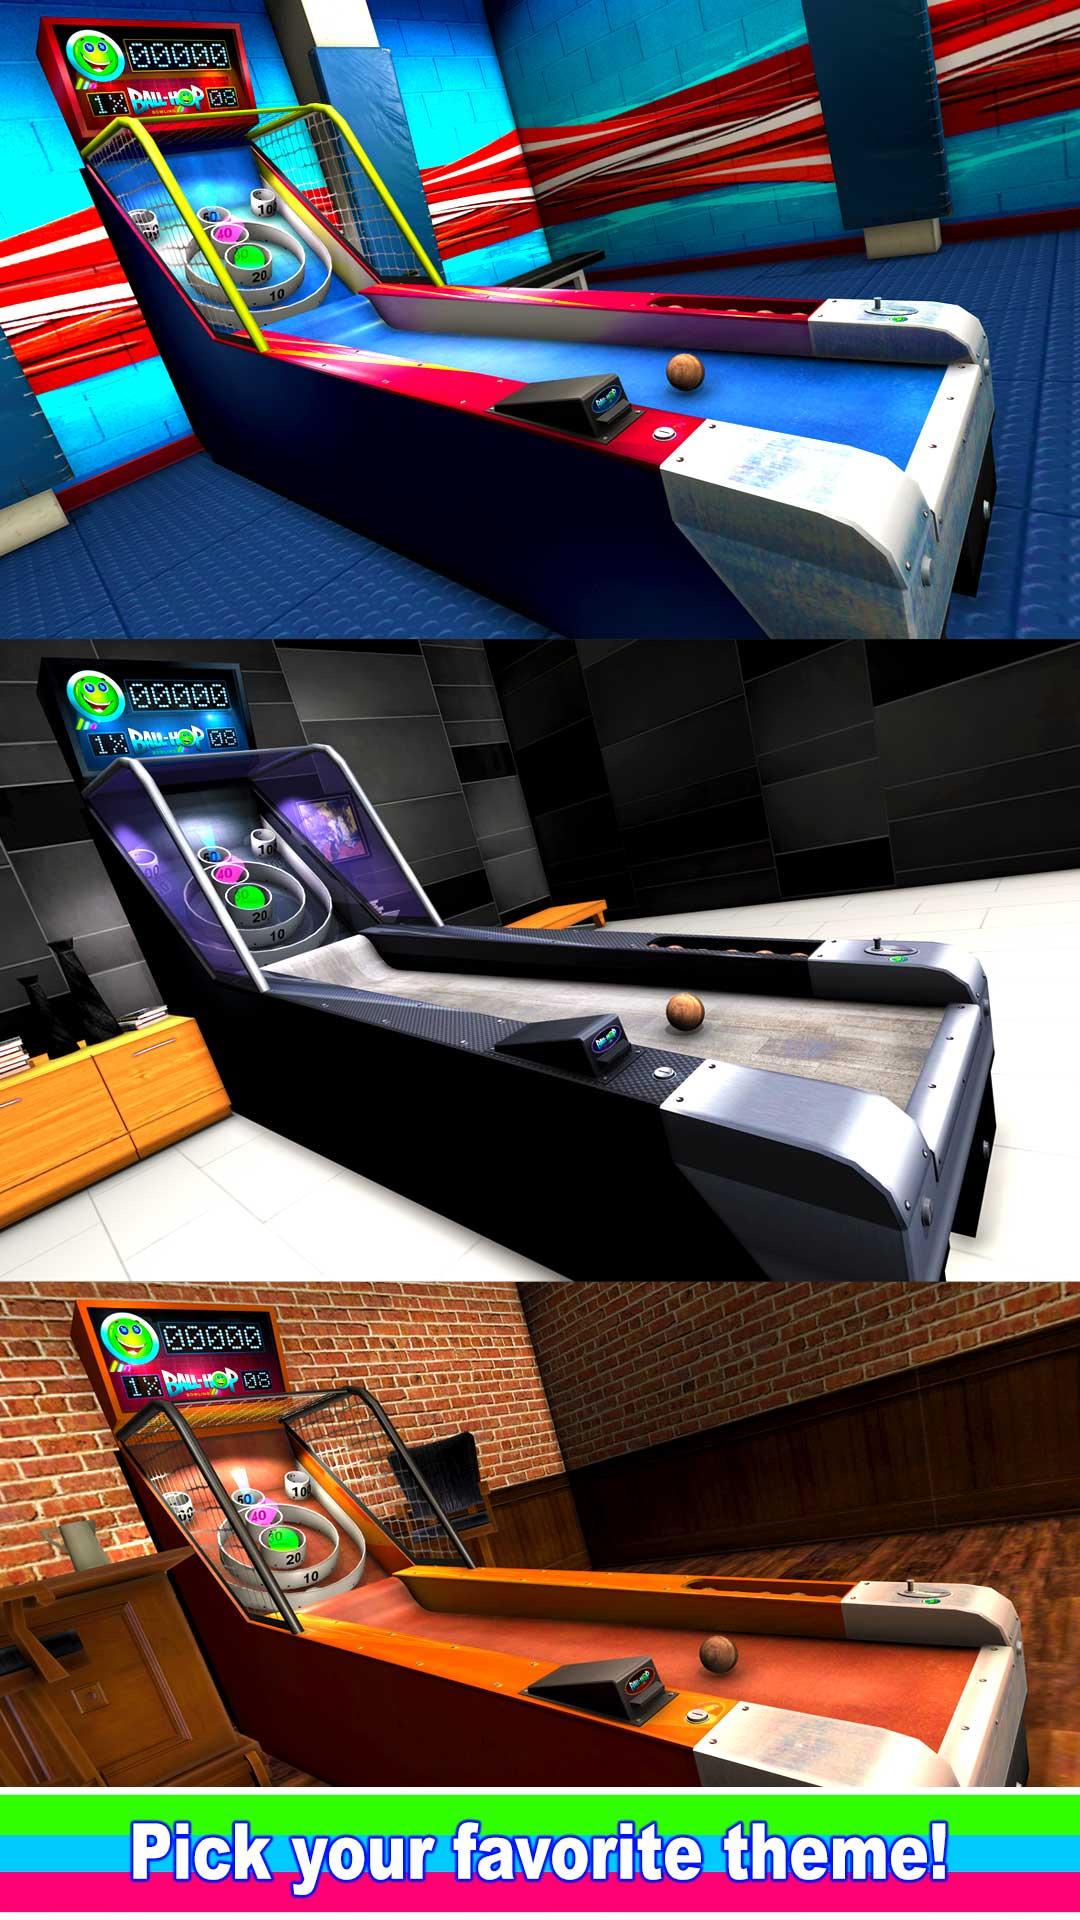 Android application Ball-Hop Bowling - The Original Alley Roller screenshort